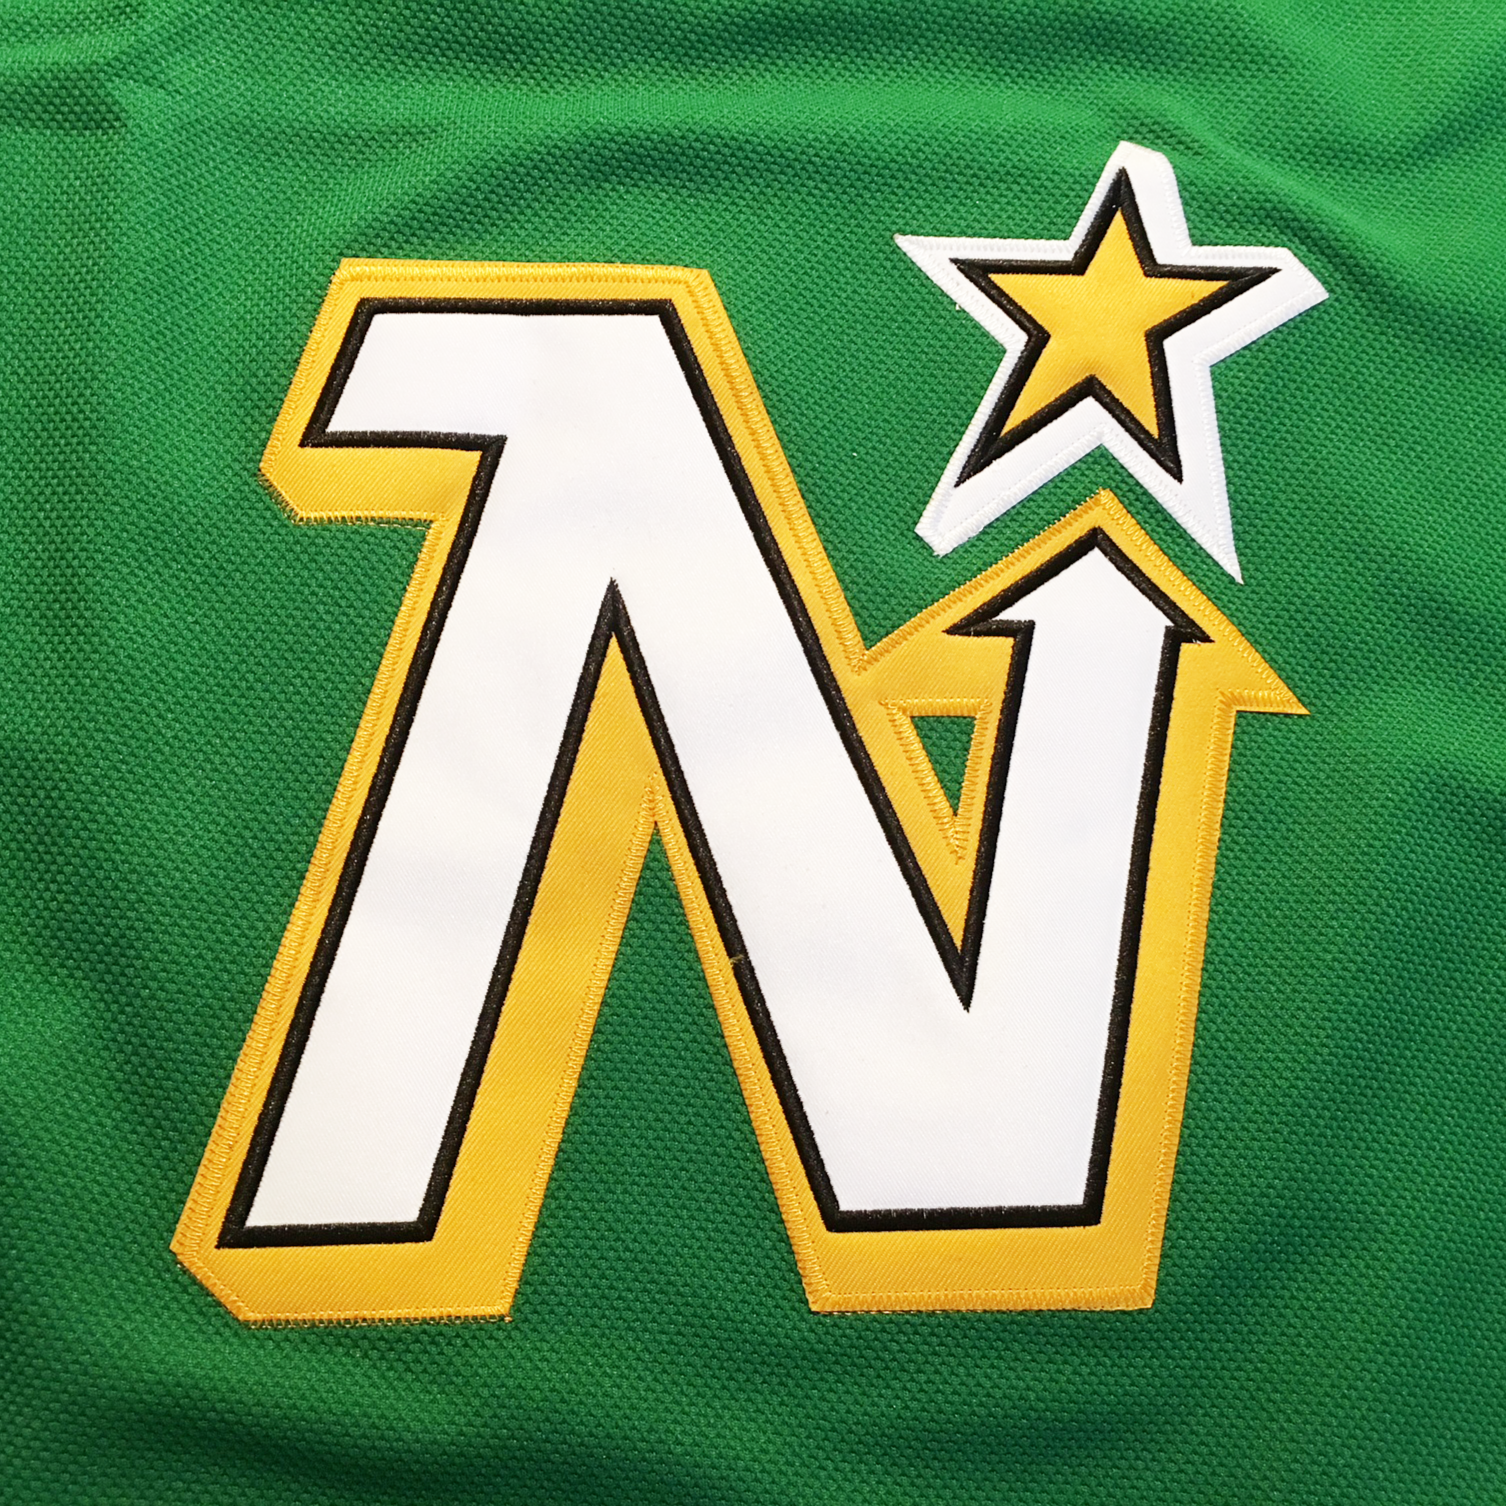 North Stars Style Jersey and Socks. AK and CCM Pro Stock Size Large